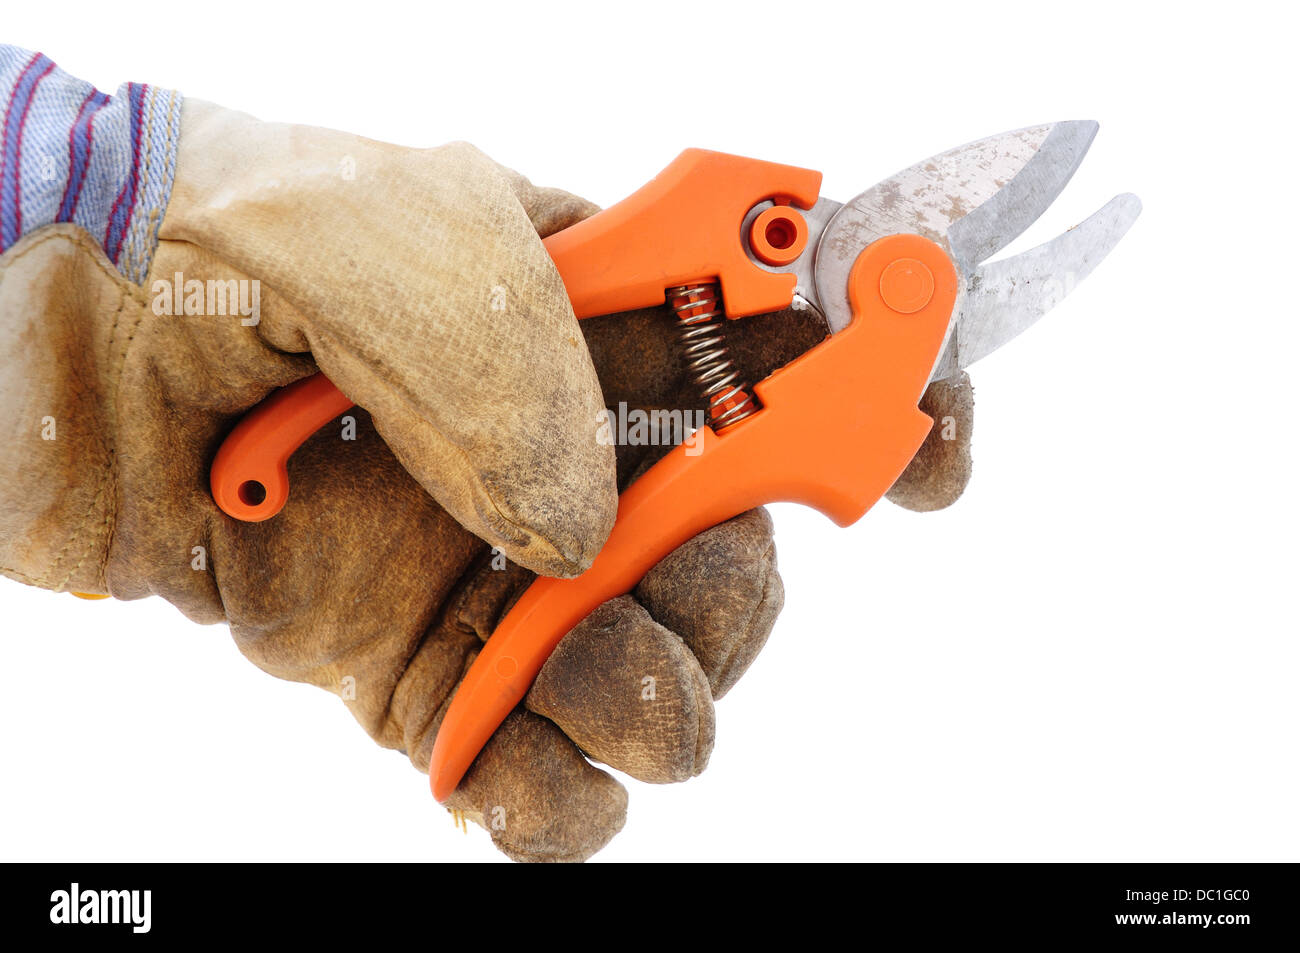 Secateurs or pruning shears on a white background Stock Photo